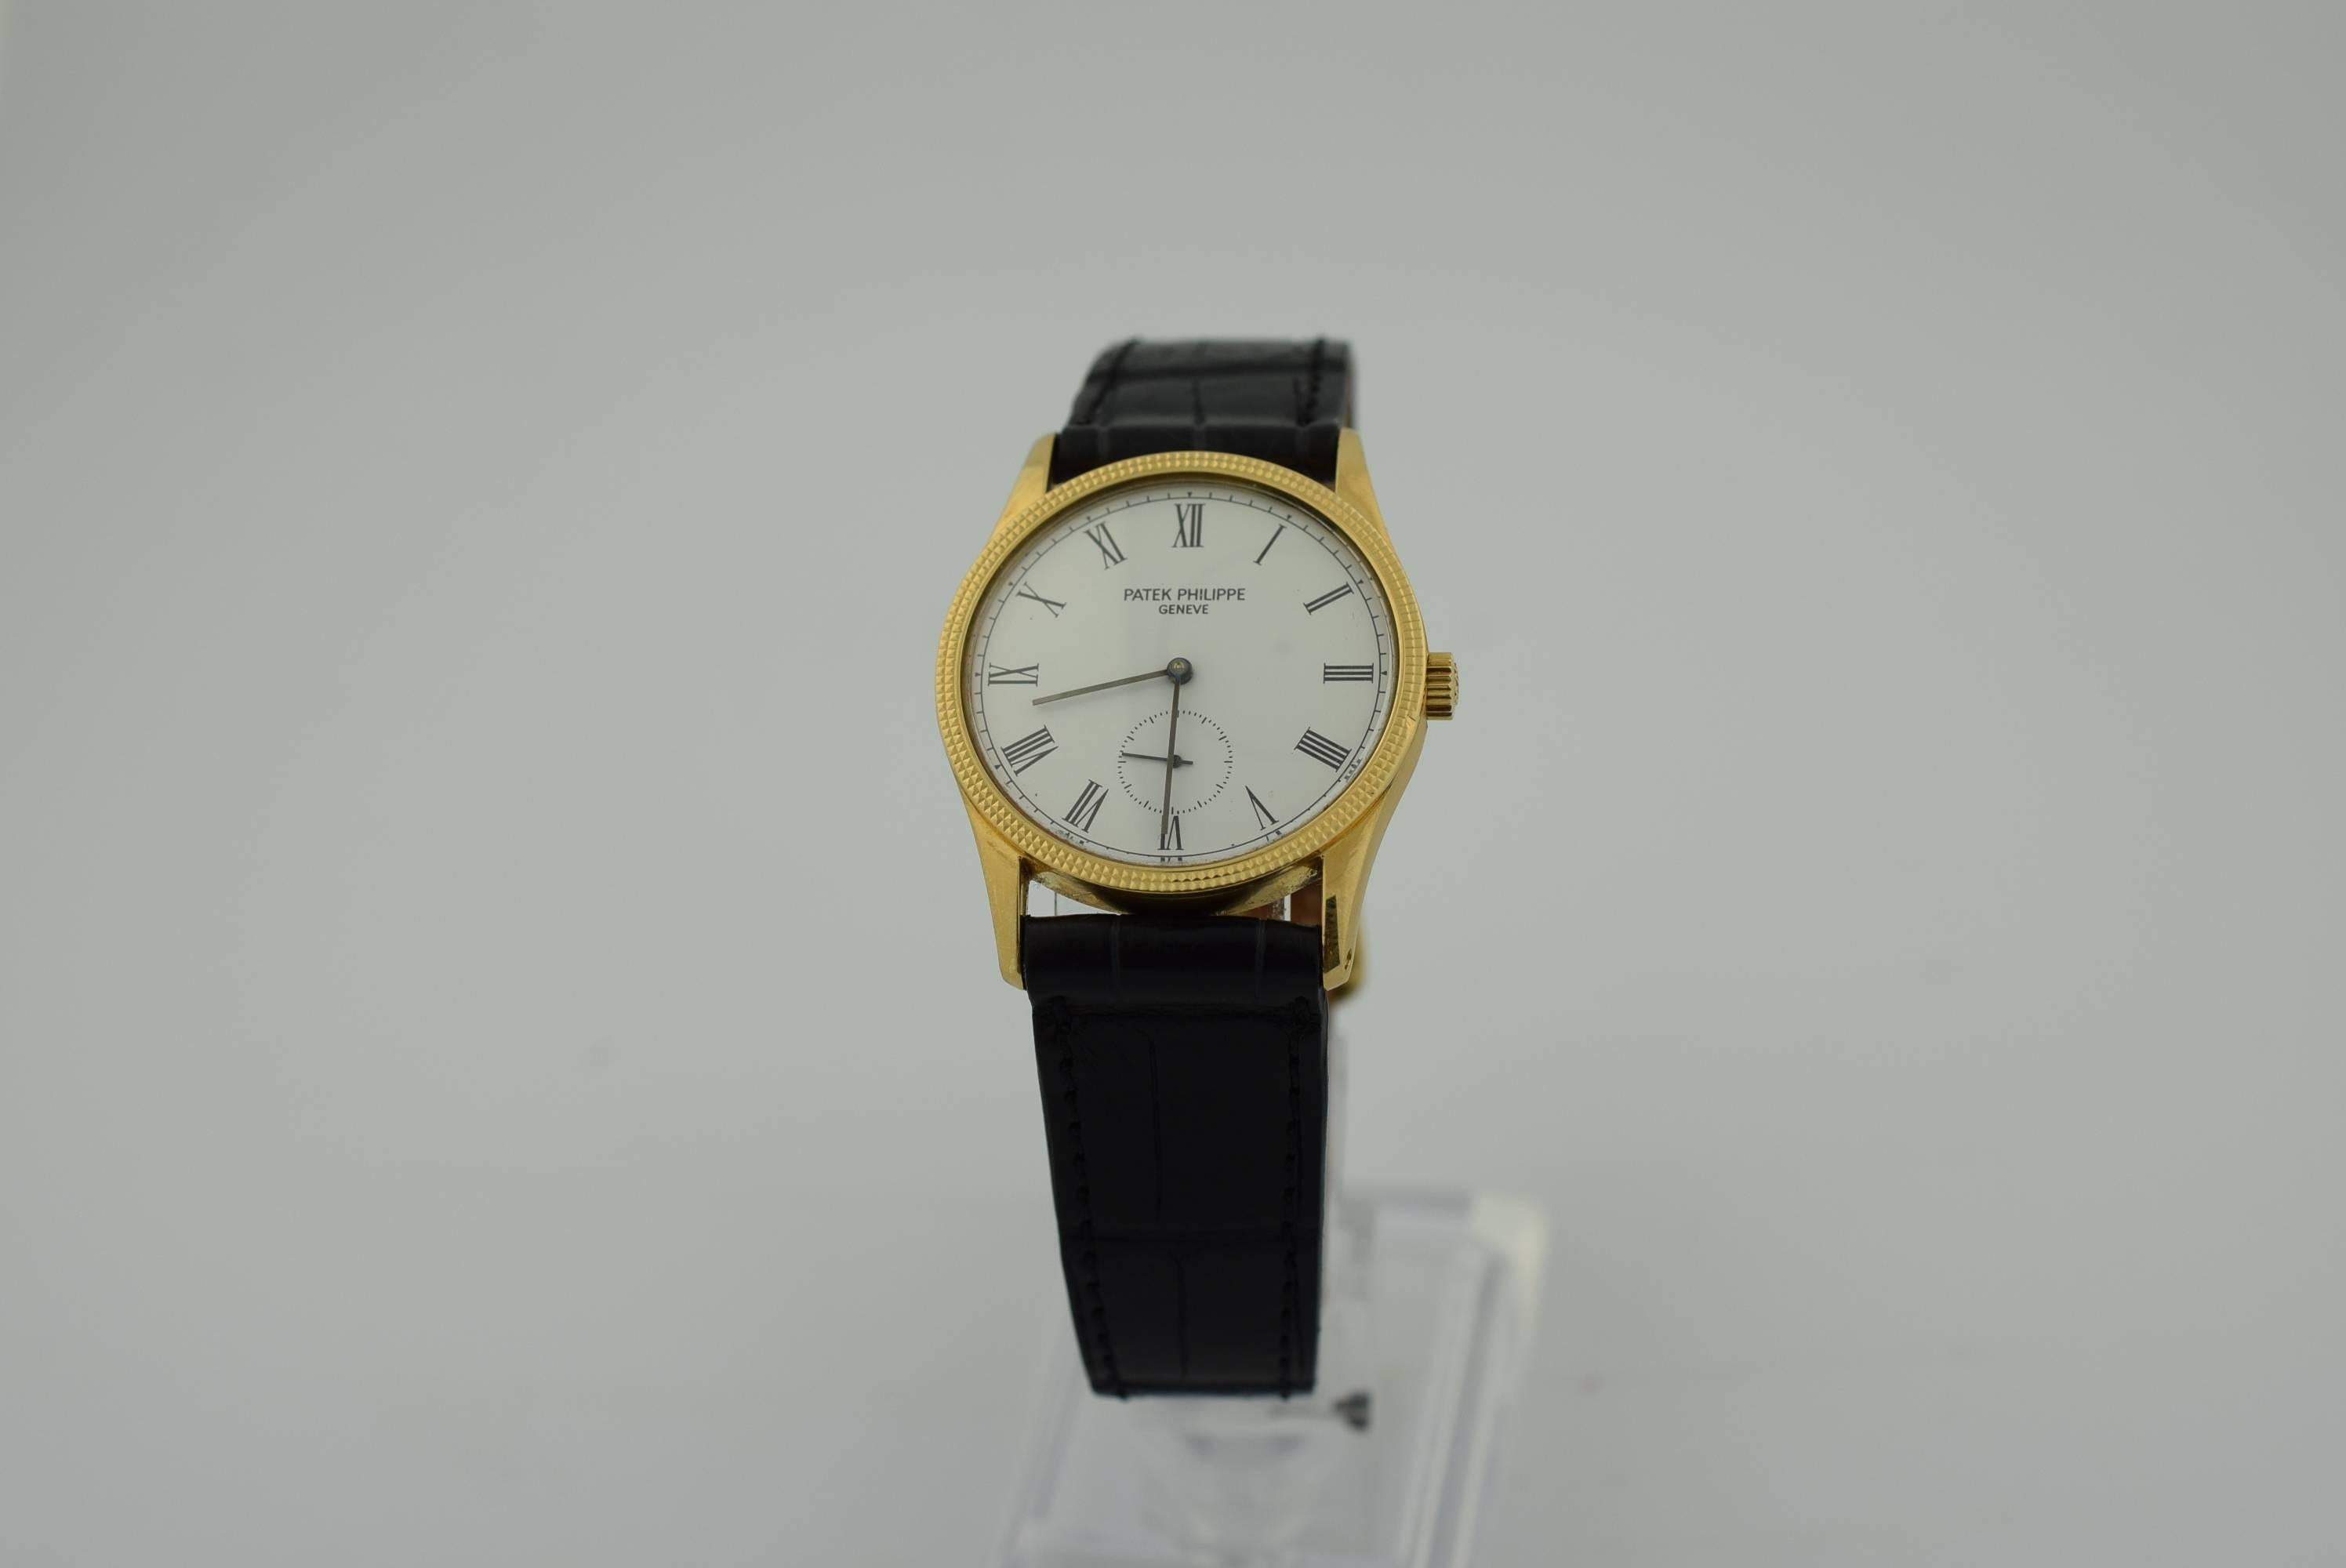 Patek Philippe 18k Yellow Gold Calatrava model 3796 J .
Manual wind .White Dial with Roman numerals . Sub second hand .
33 mm case diameter .Patek snow flake crown .Hob nail bezel .Black crocodile band .Excellent condition and recently serviced